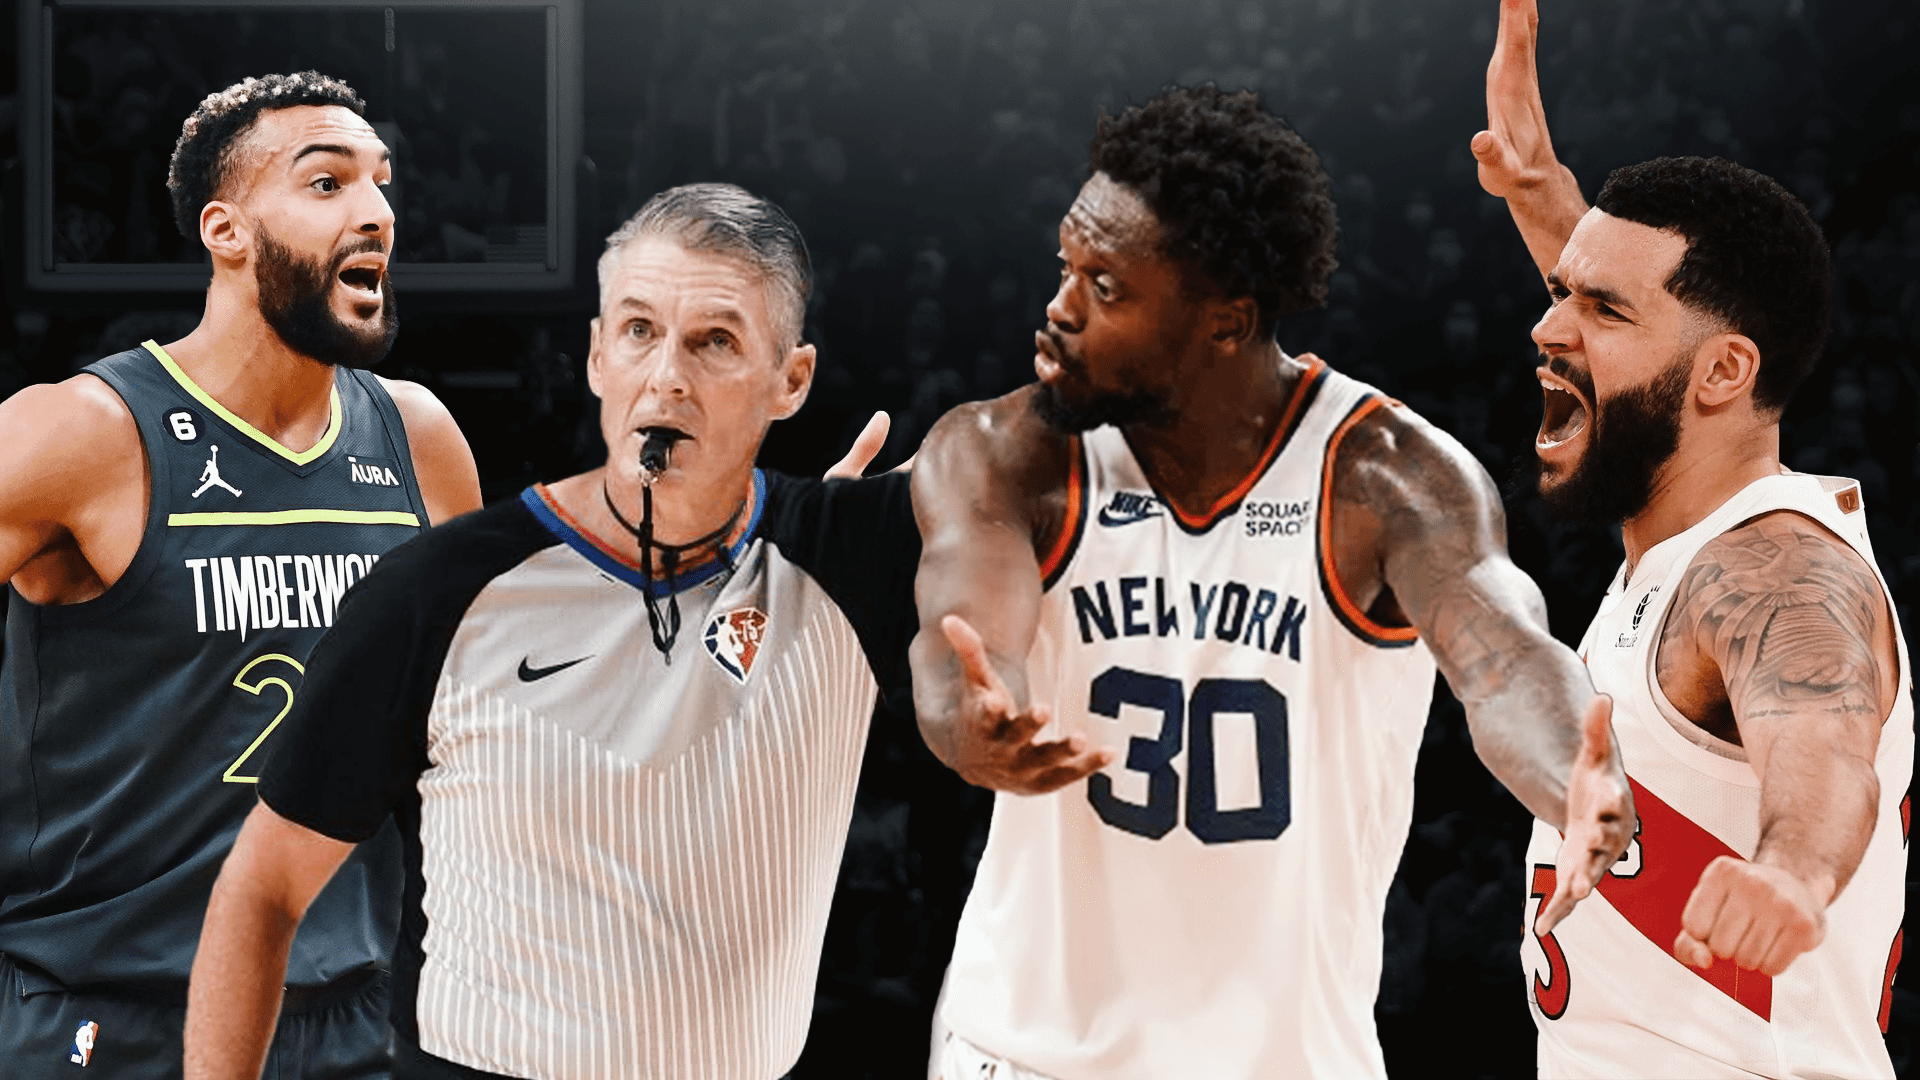 NBA Refs Are Getting Roasted Even More Than Usual This Season